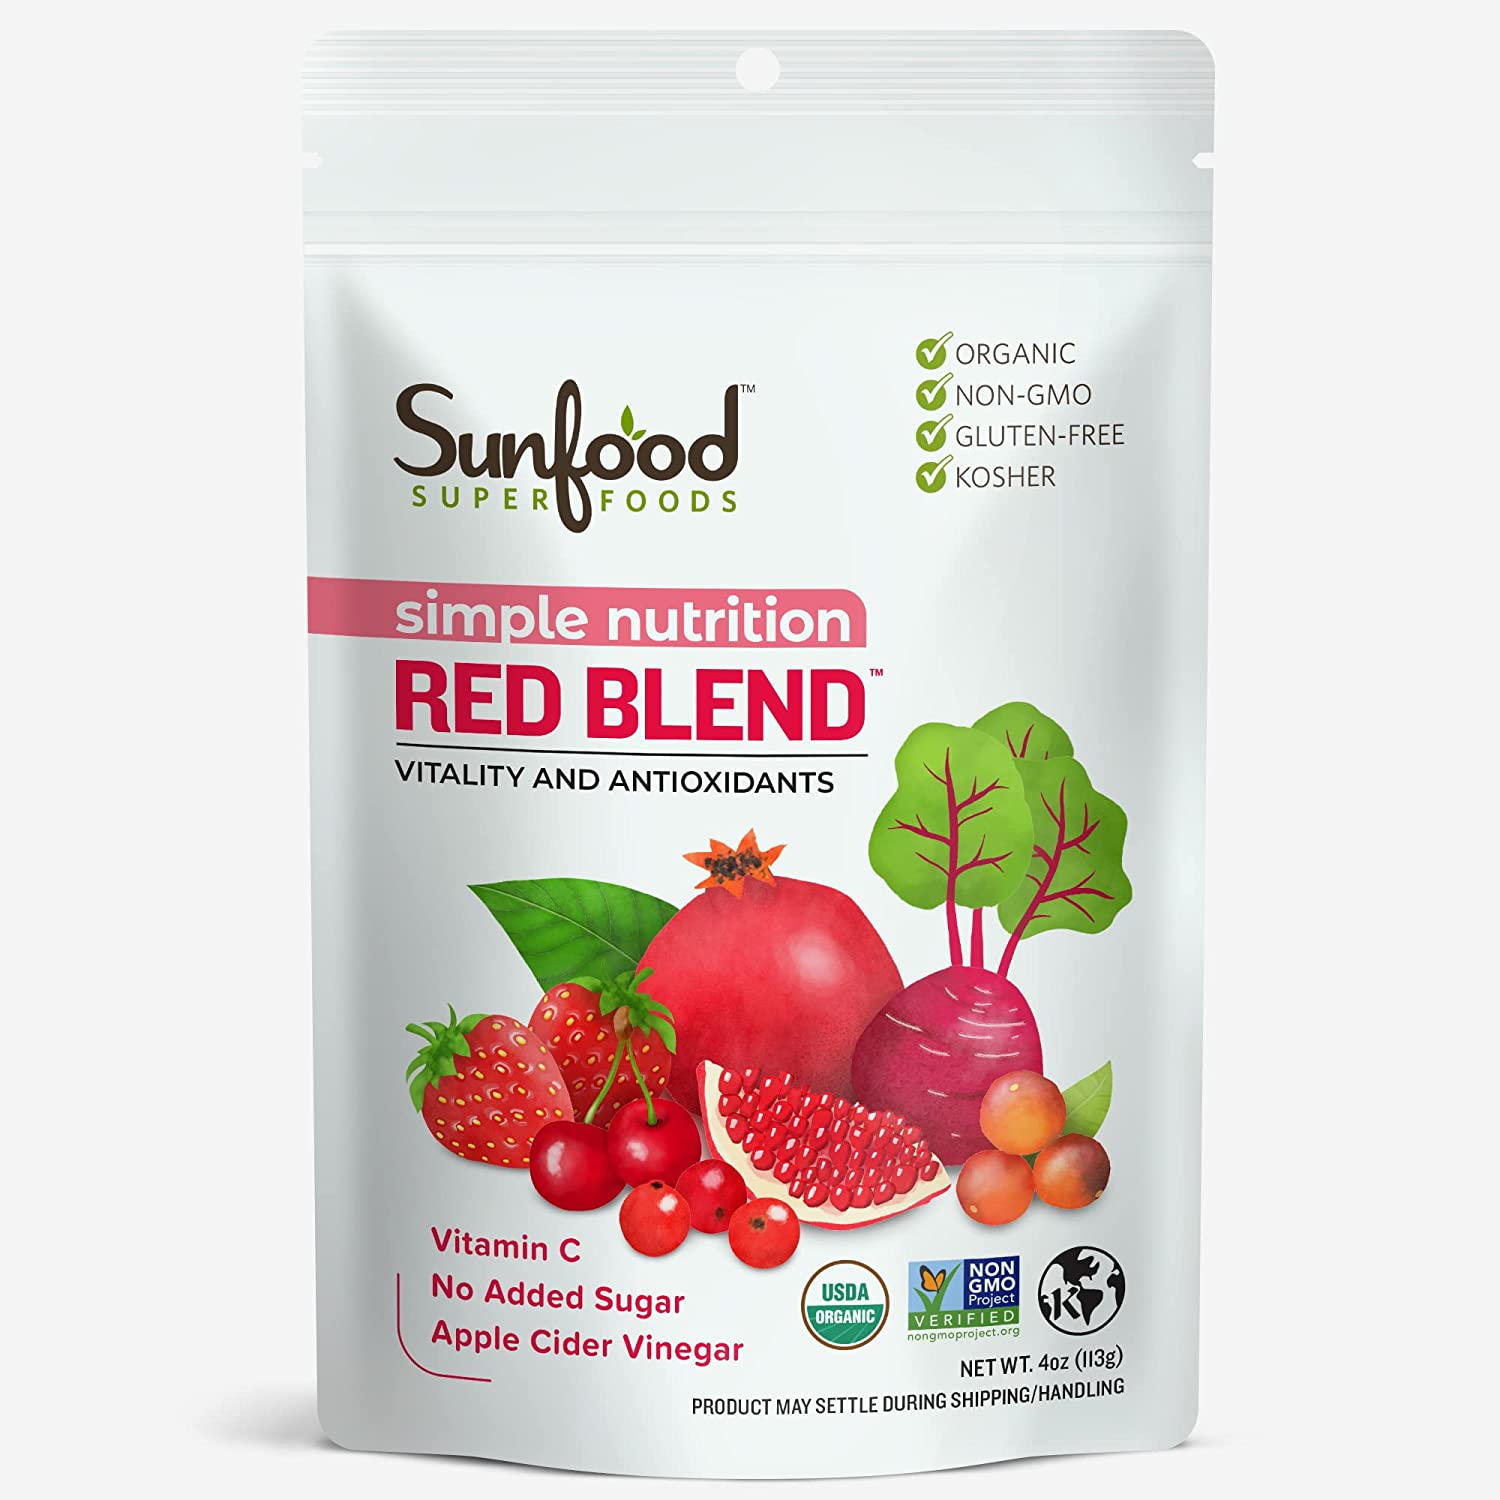 SUNFOOD SIMPLE NUTRITION RED BLEND